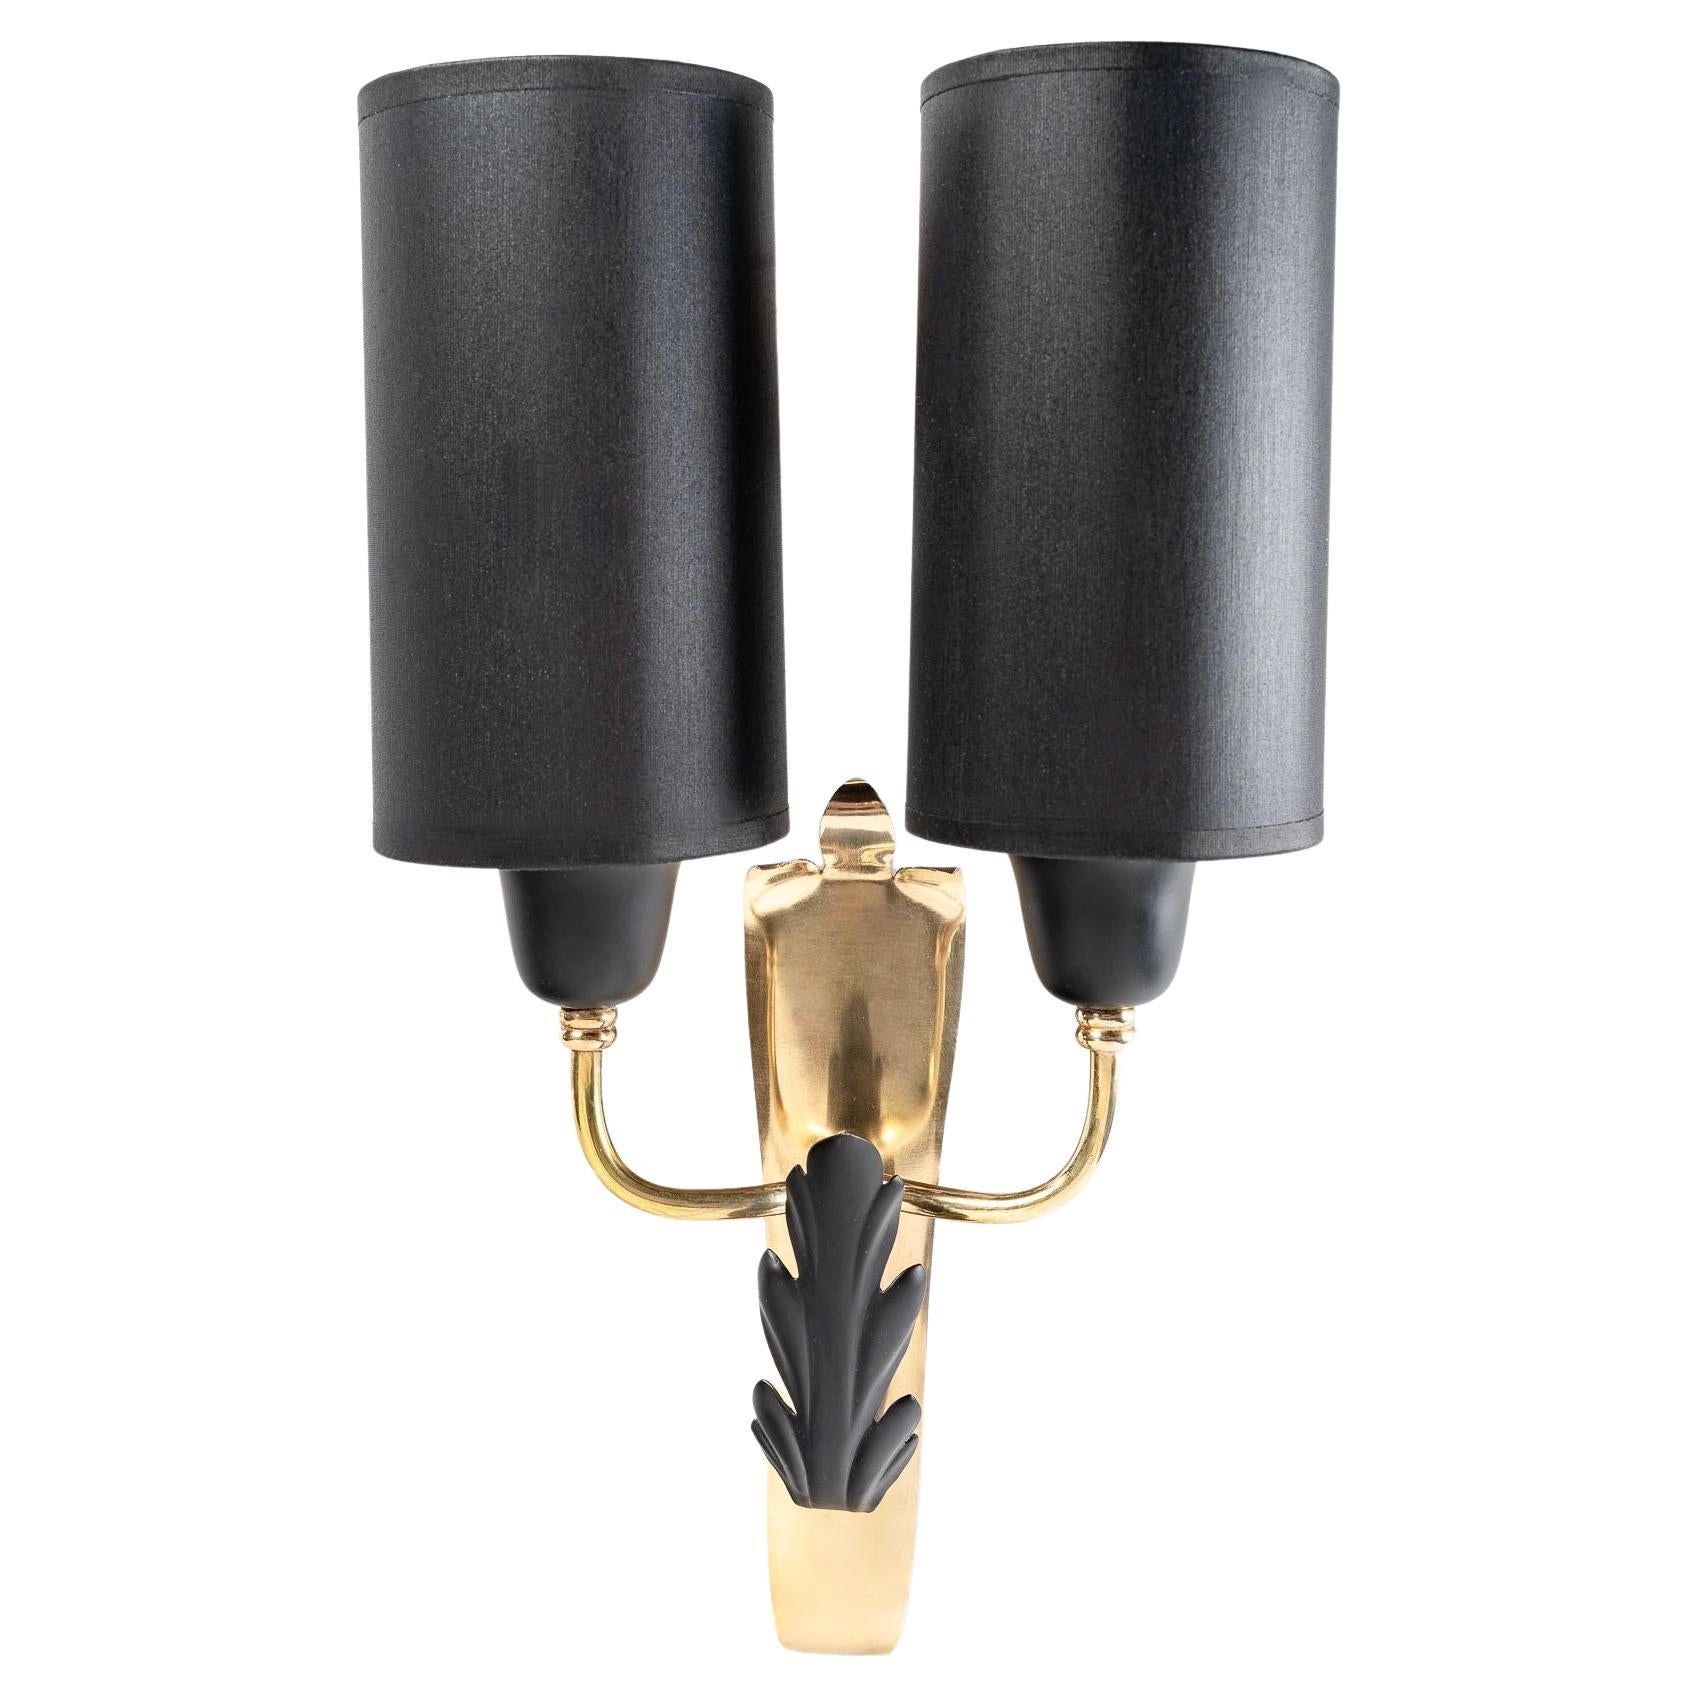 Composed of a wall base inspired by a gilded brass crest decorated on the lower part with a stylized oak leaf in blackened brass.
Just above, two small arms of light going up distributed on each side of the wall lamp are dressed with lampshades of